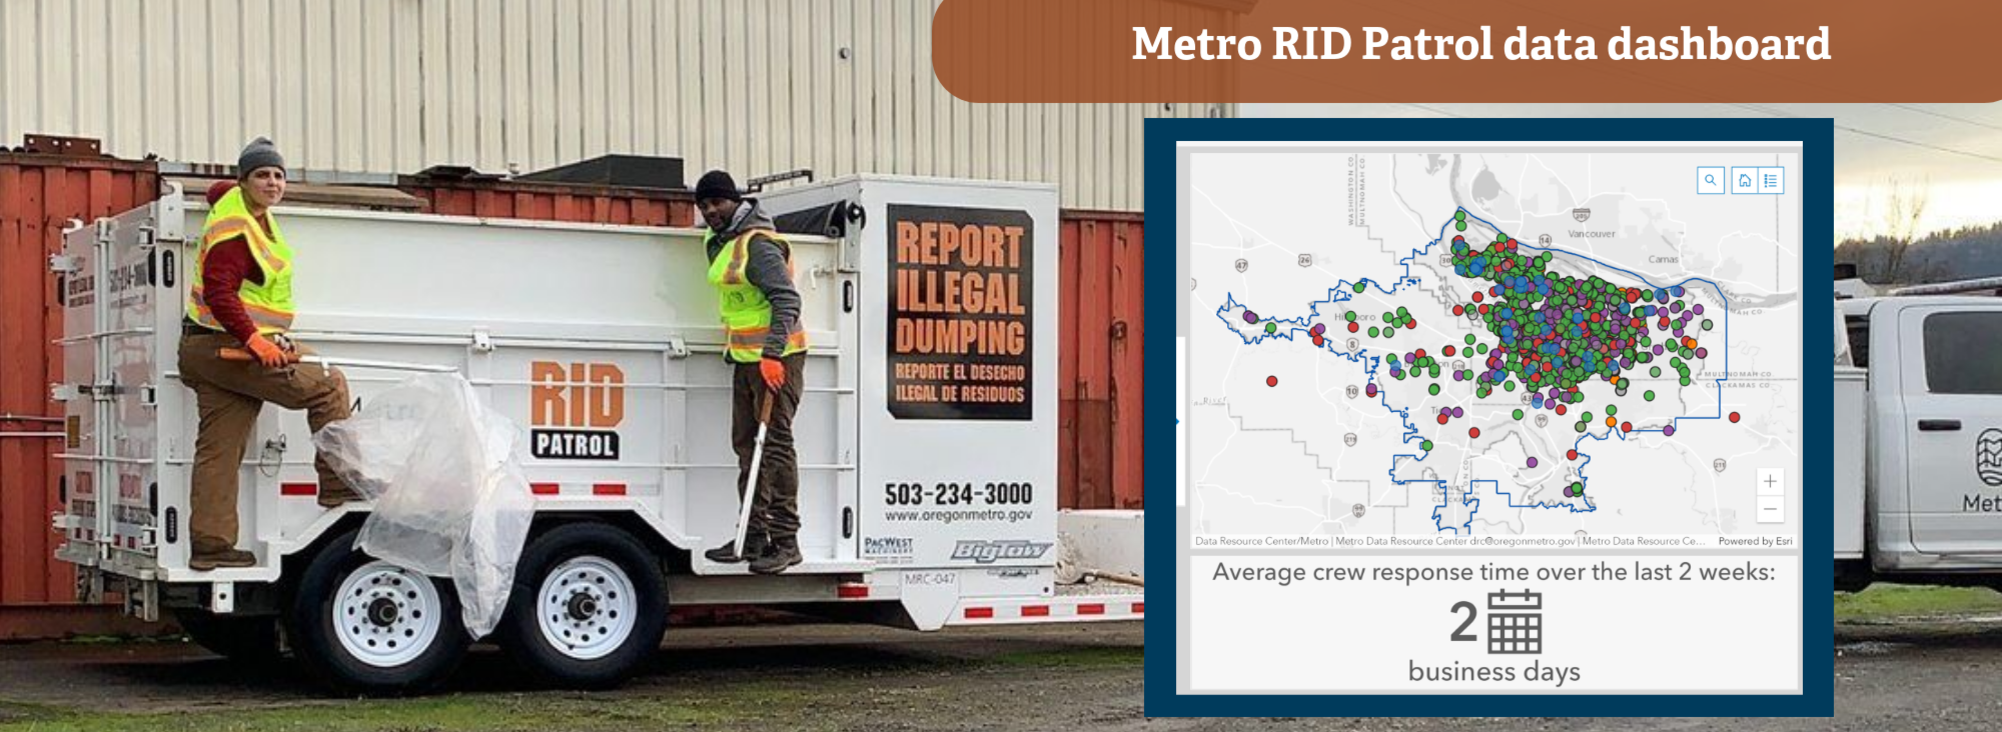 Photo of Metro RID patrol garbage staff and a screenshot of a section of the RID patrol data dashboard